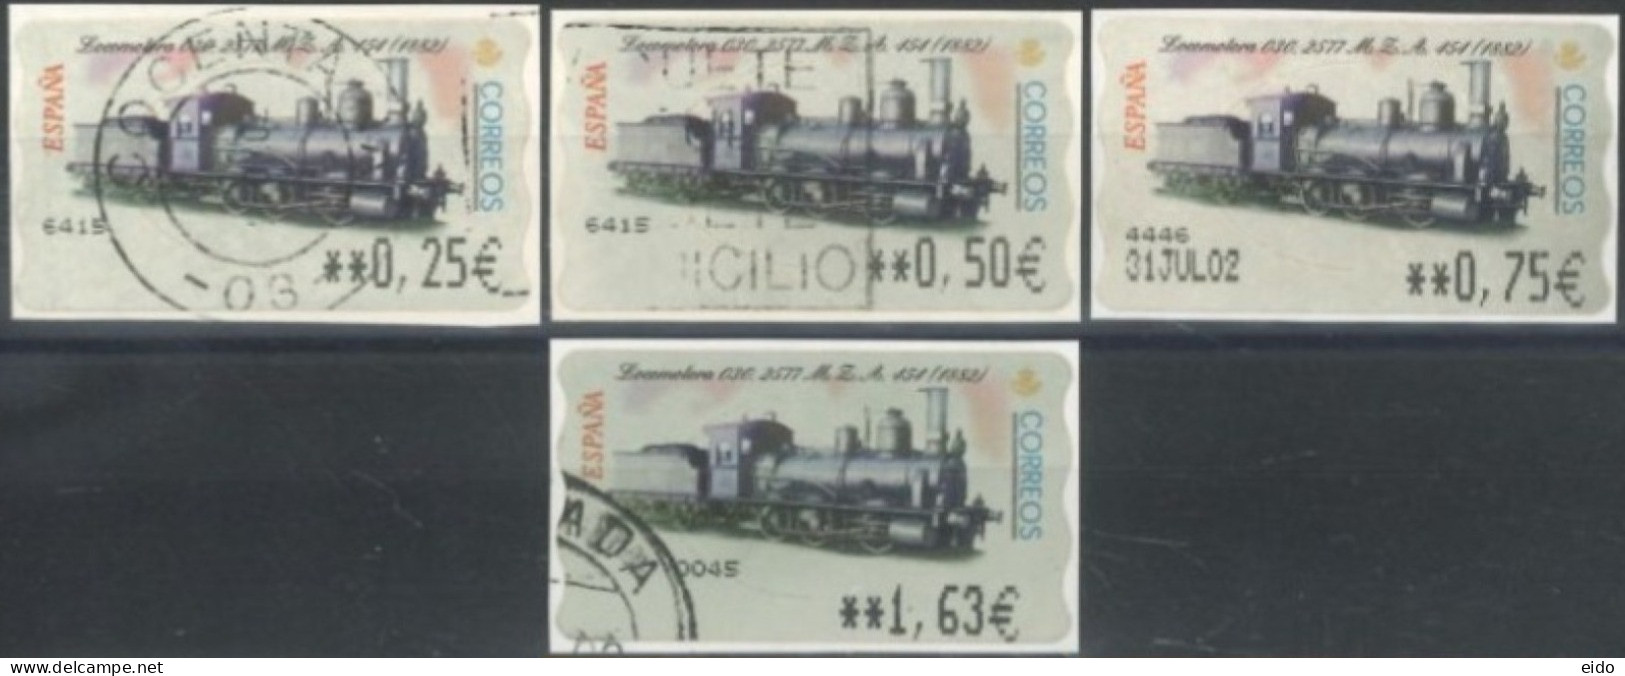 SPAIN- 2002, LOCOMOTIVES STAMPS LABELS SET OF 4, DIFFERENT VALUES, USED. - Used Stamps